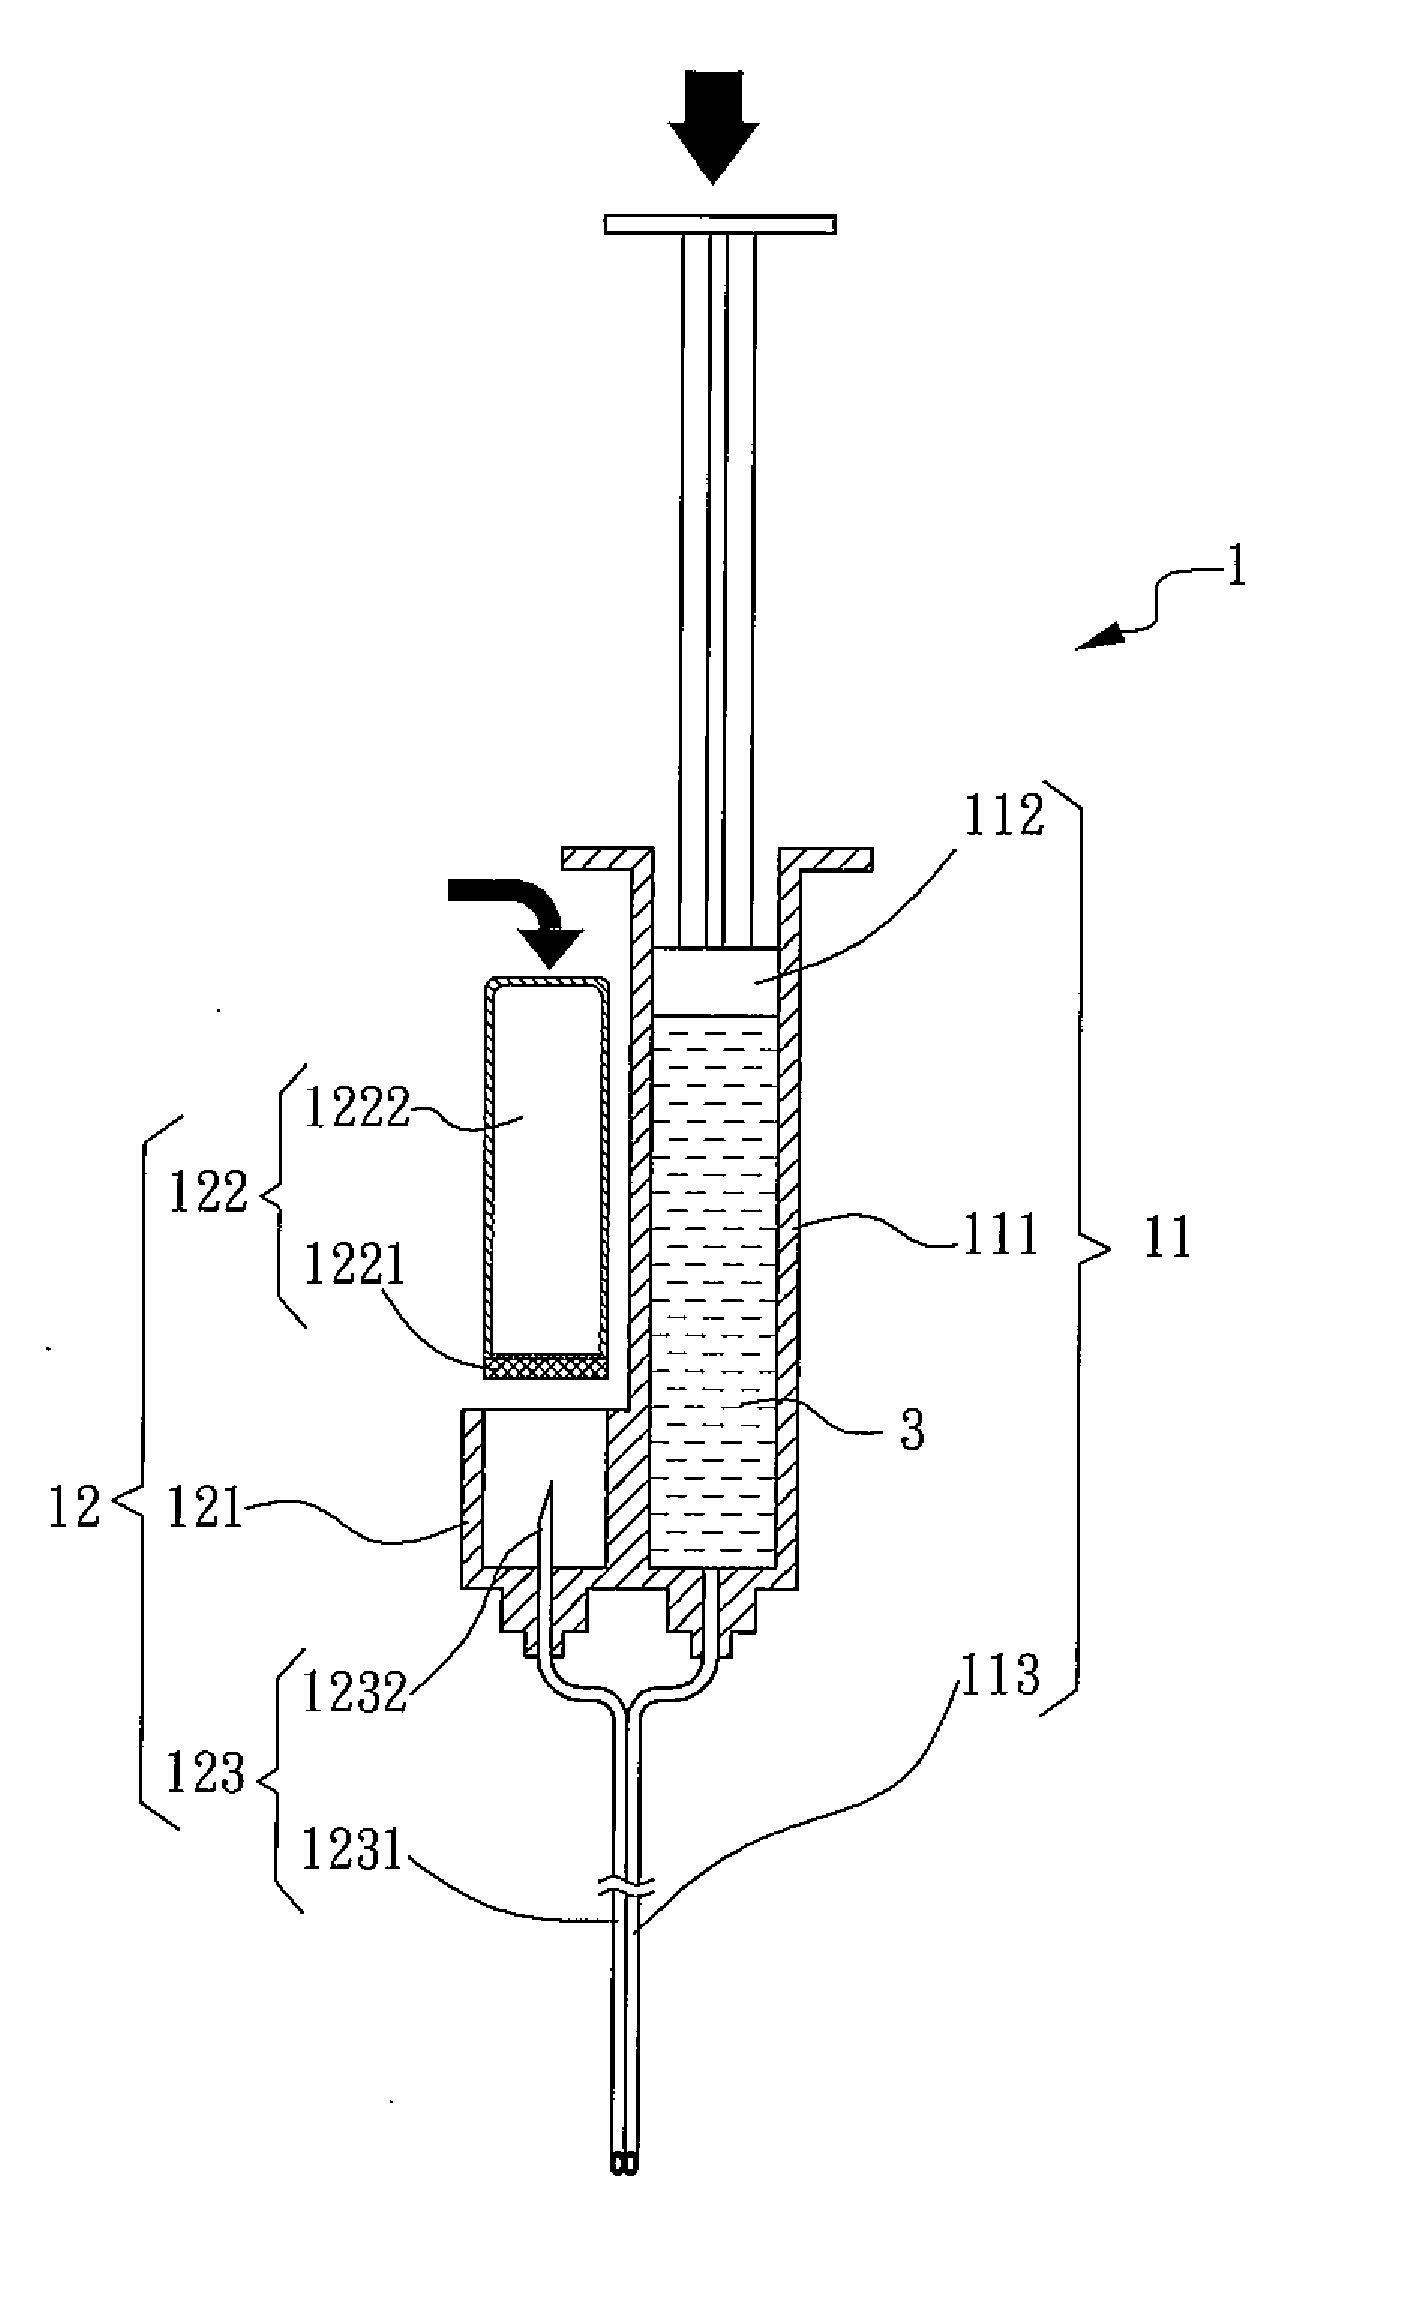 Organism Paracentesis Device And Method Thereof